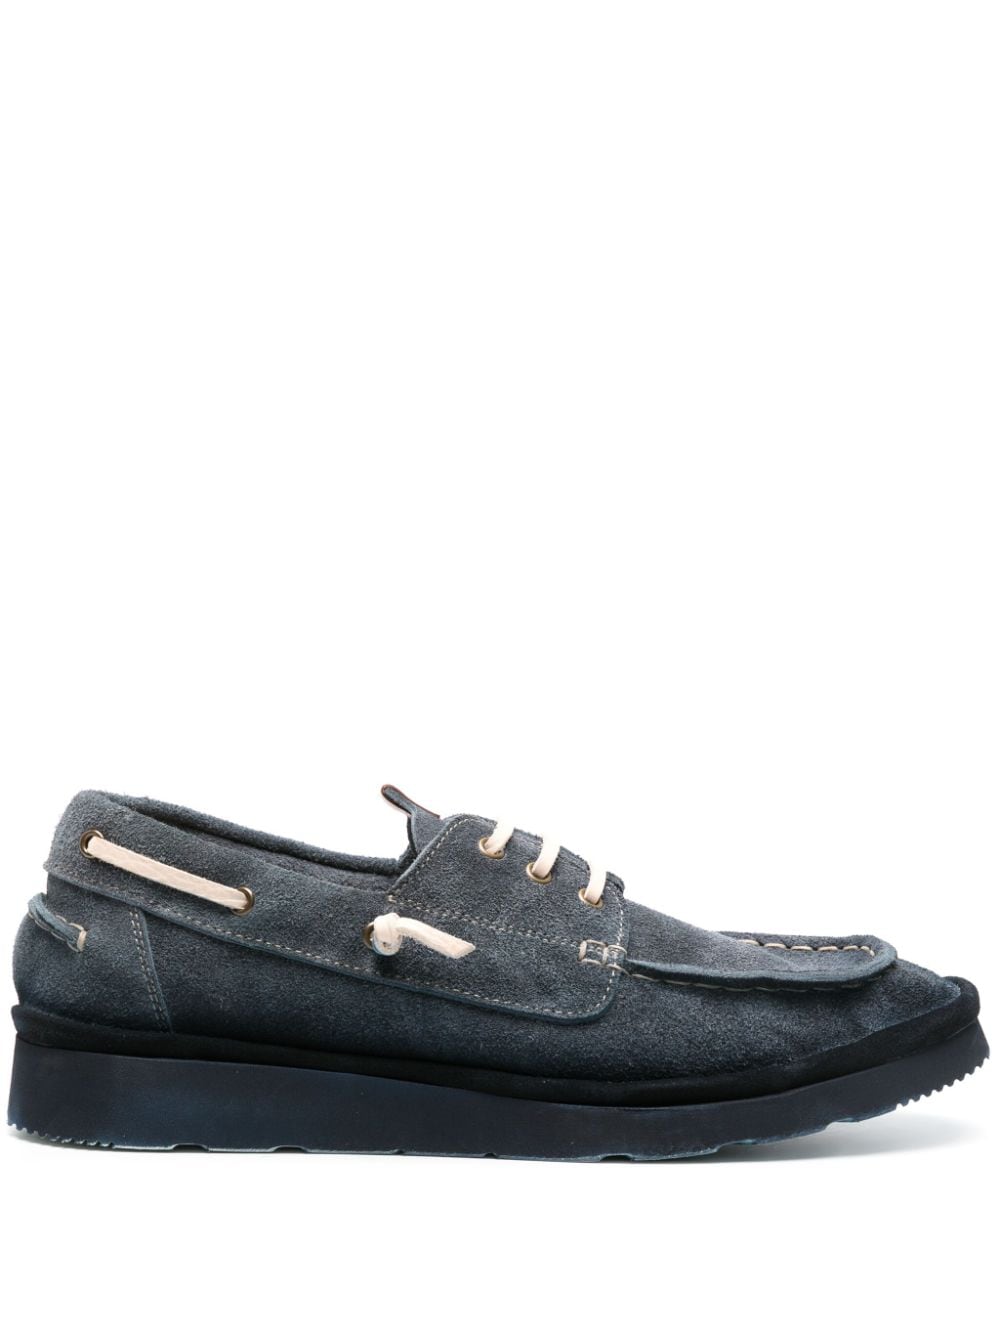 Moma suede tonal boat shoes - Blue von Moma